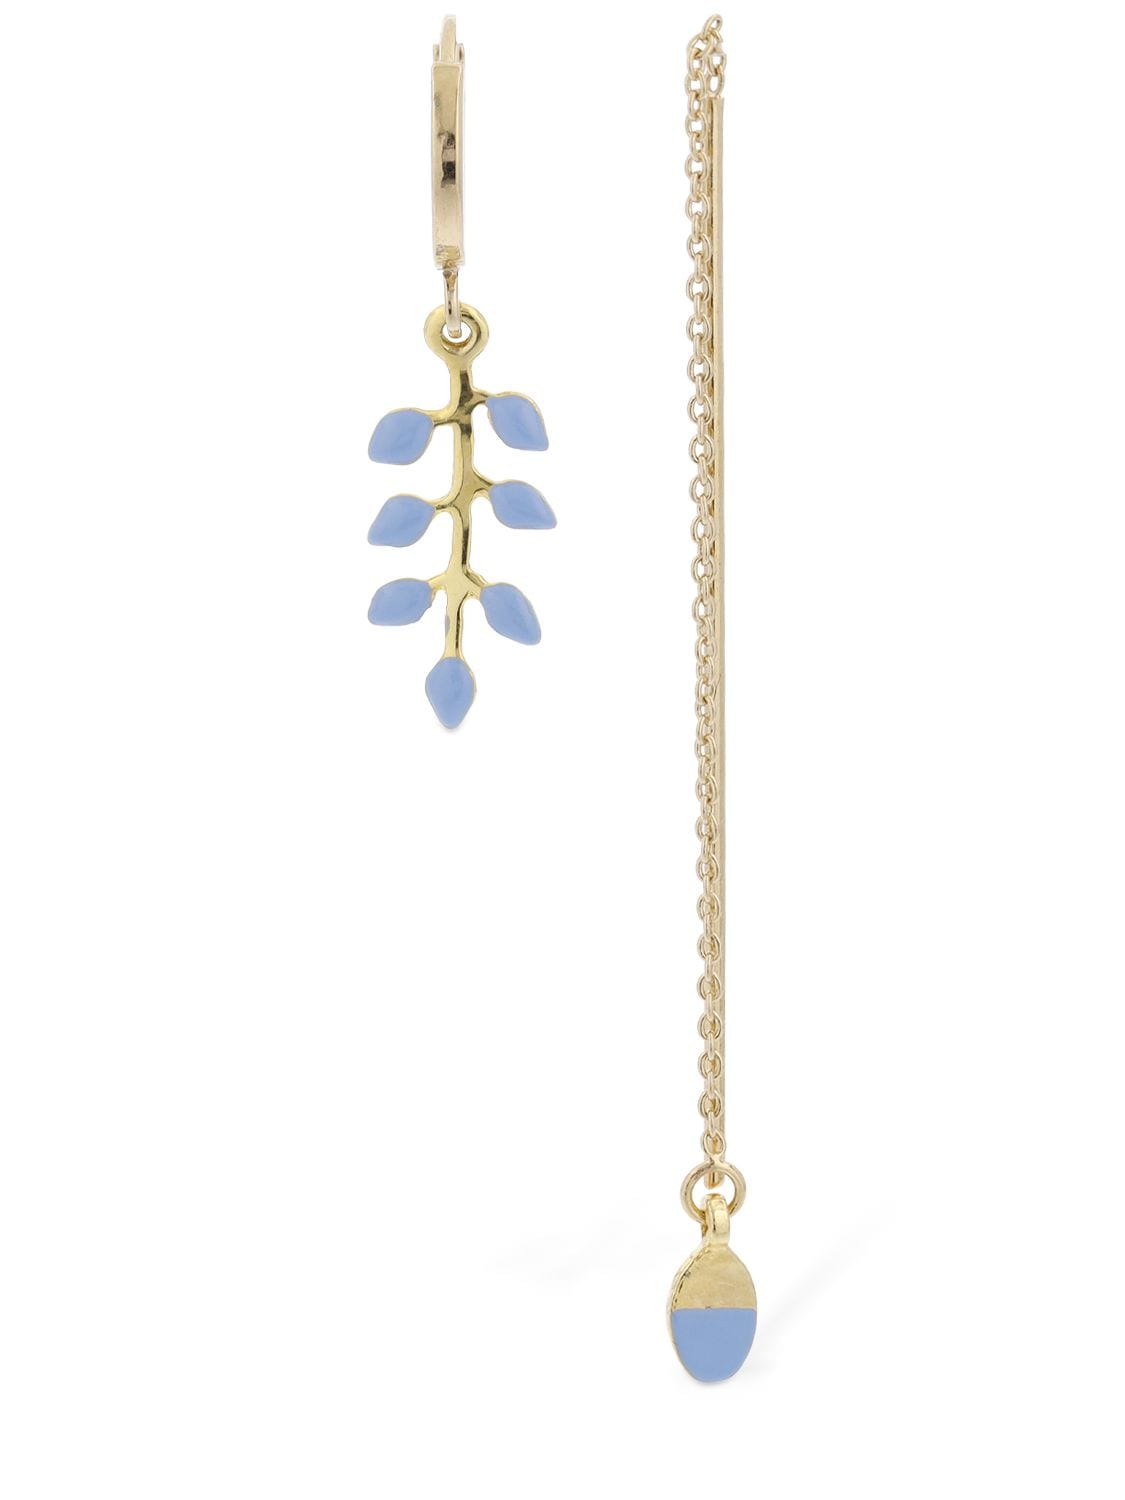 Isabel Marant Casablanca Mismatched Earrings In Blue,gold